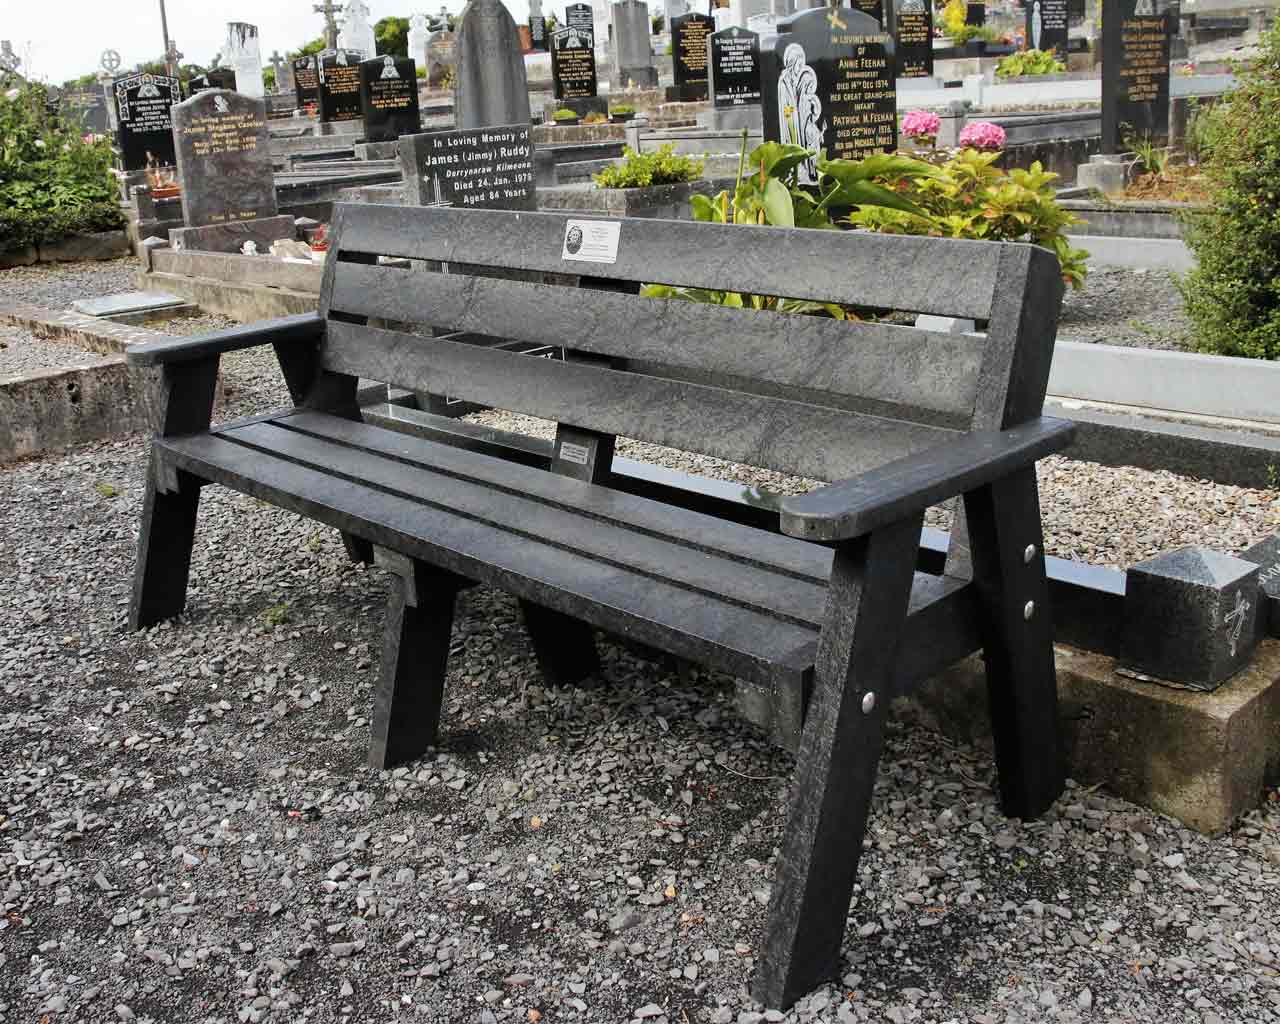 Remembrance & Memorial Benches